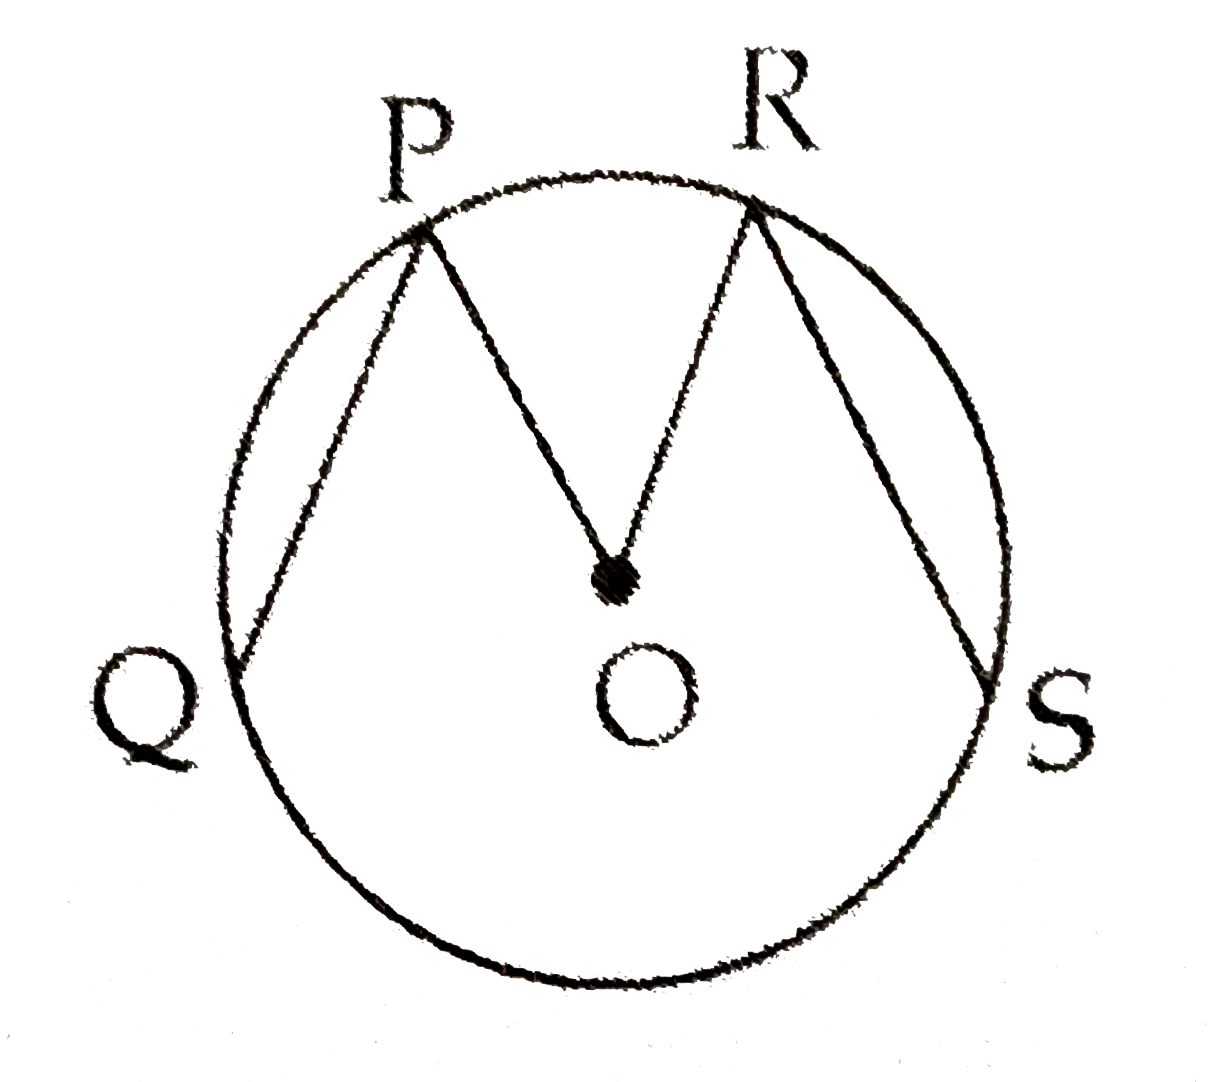 In  a circle with centre 'O'  chord PQ ~= chord RS     IF m anglePOR=70^(@)  and m (arc RS)   =80^(@) , then find      (1) m (arc  PR)     (2)  m (arc QSR)     (3)  m (arc QS)